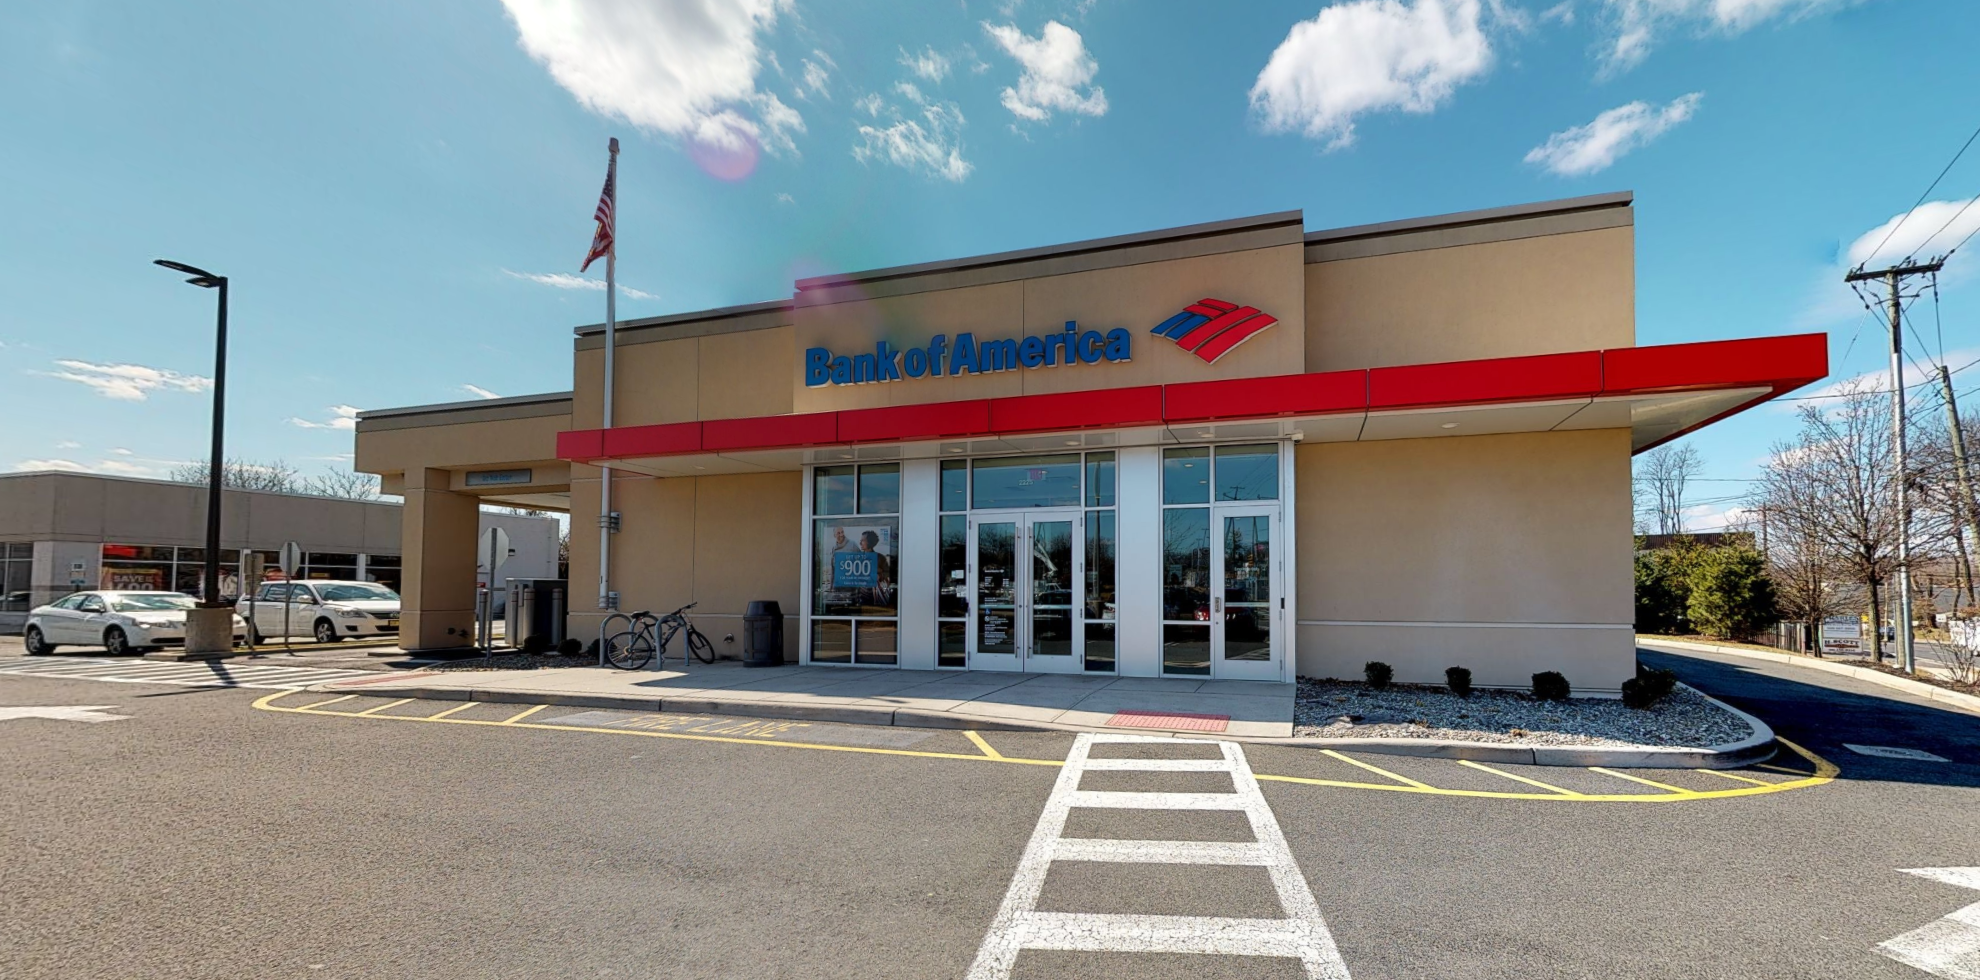 Bank of America financial center with drive-thru ATM | 2225 Springfield Ave, Vauxhall, NJ 07088